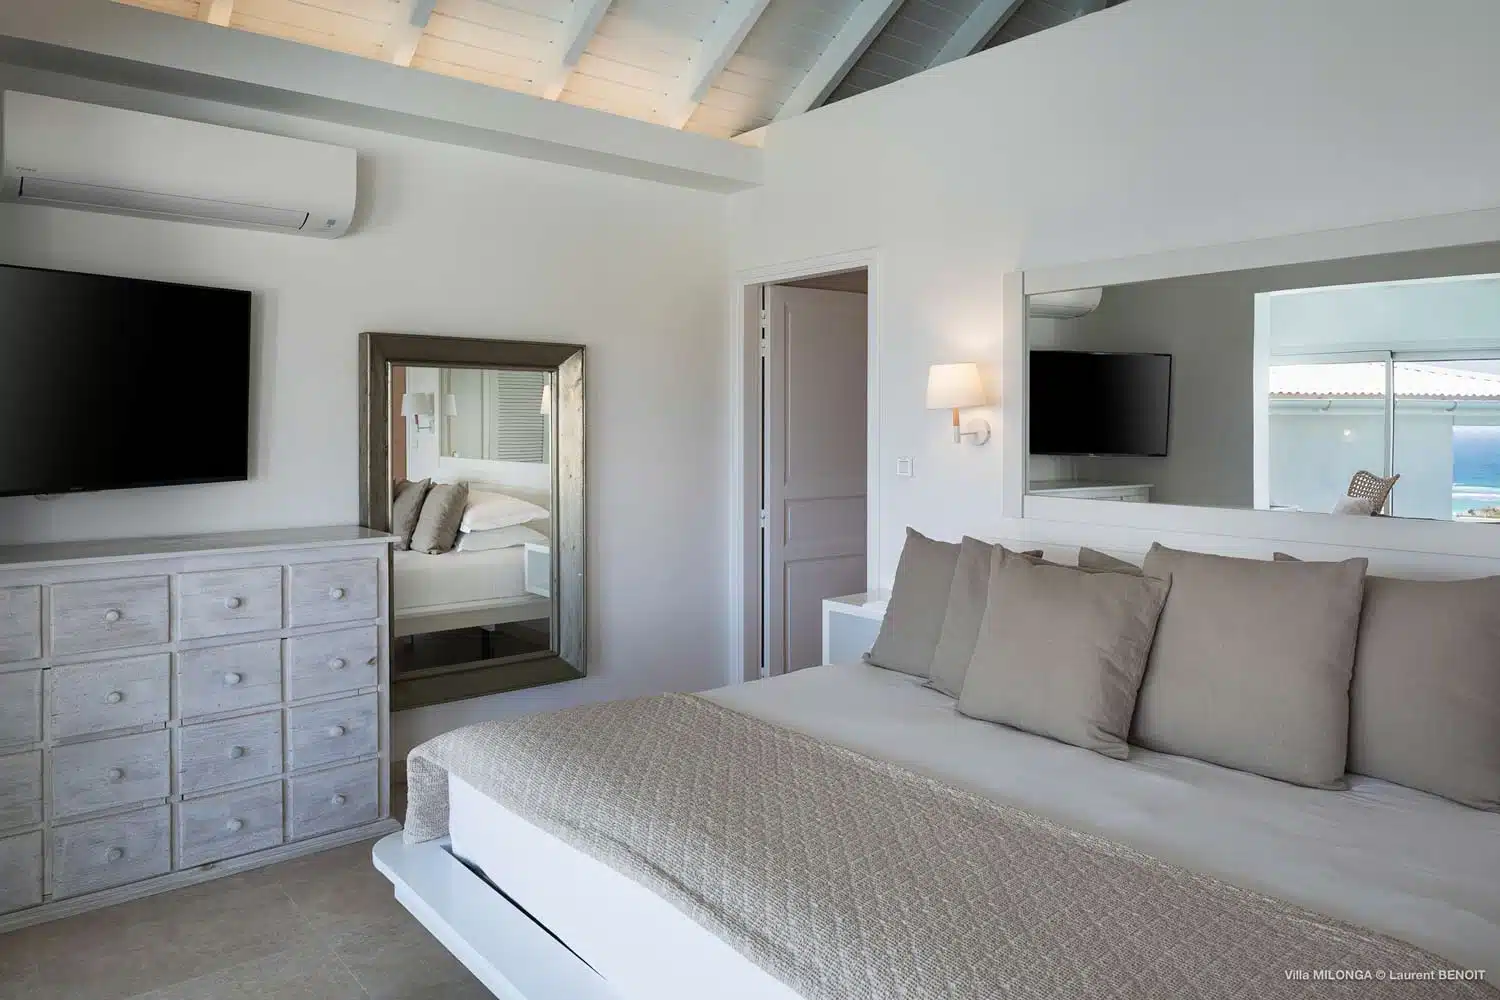 Master bedroom with sea view - Milonga villa, luxury villa for rent in St Barts